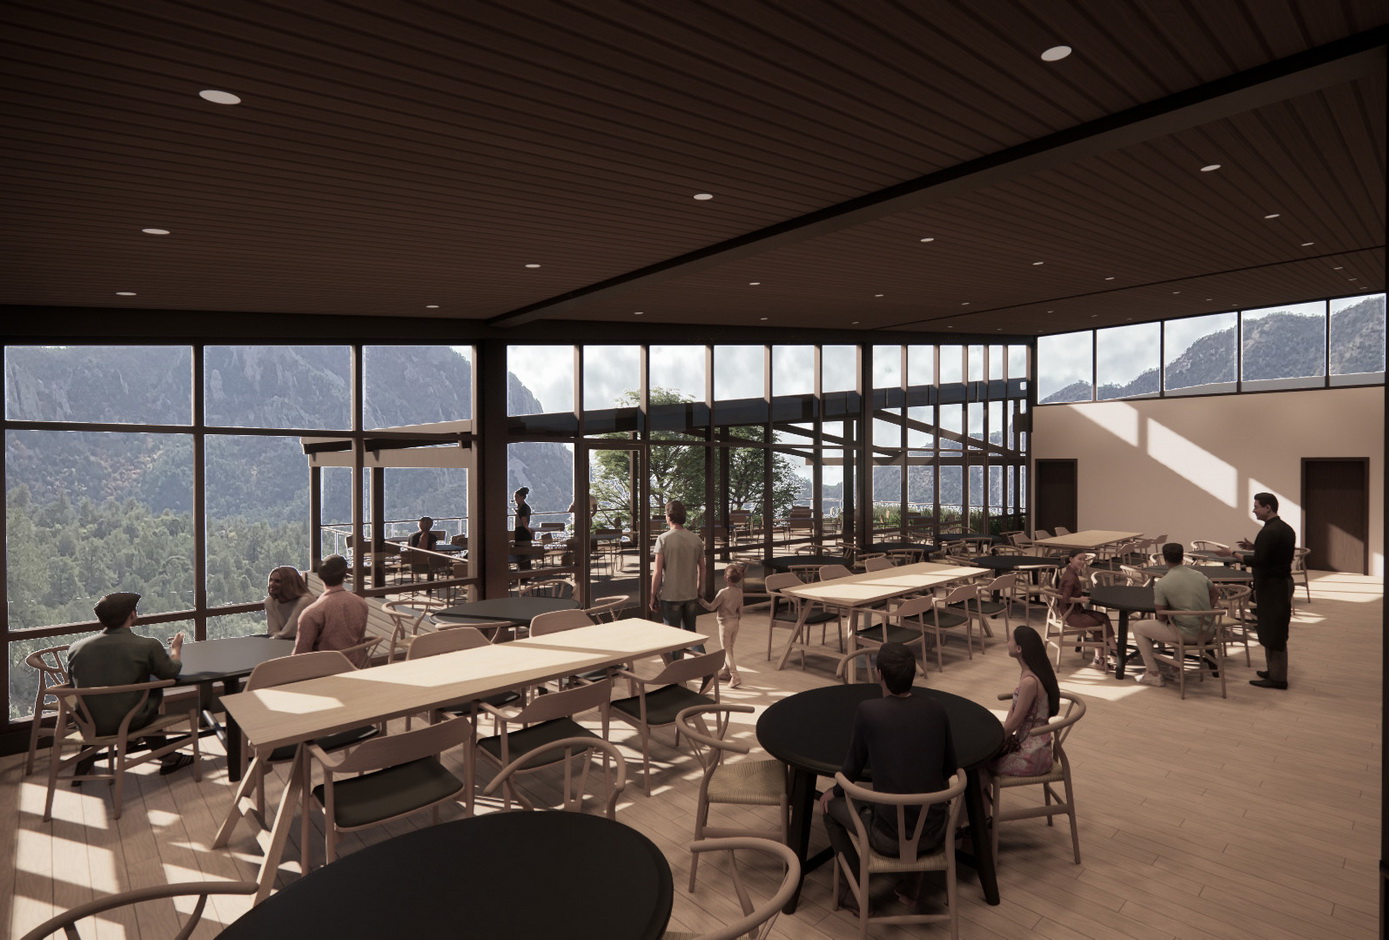 Interior rendering of a dining hall